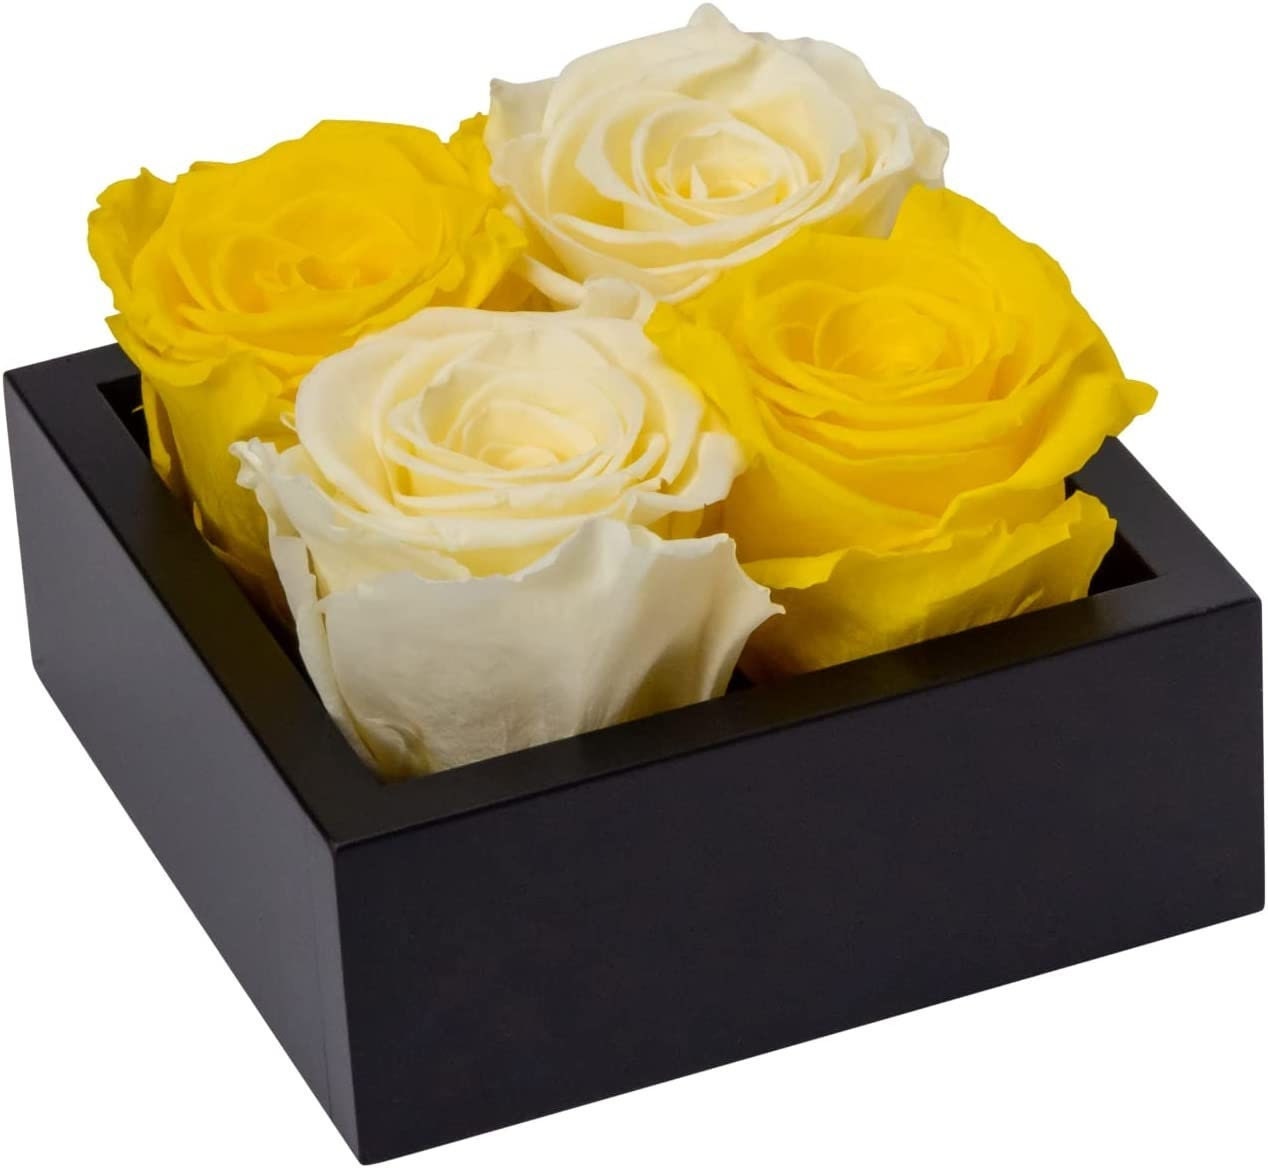 Creative Preserved Flower Gift Box Birthday Party Gift For Mom